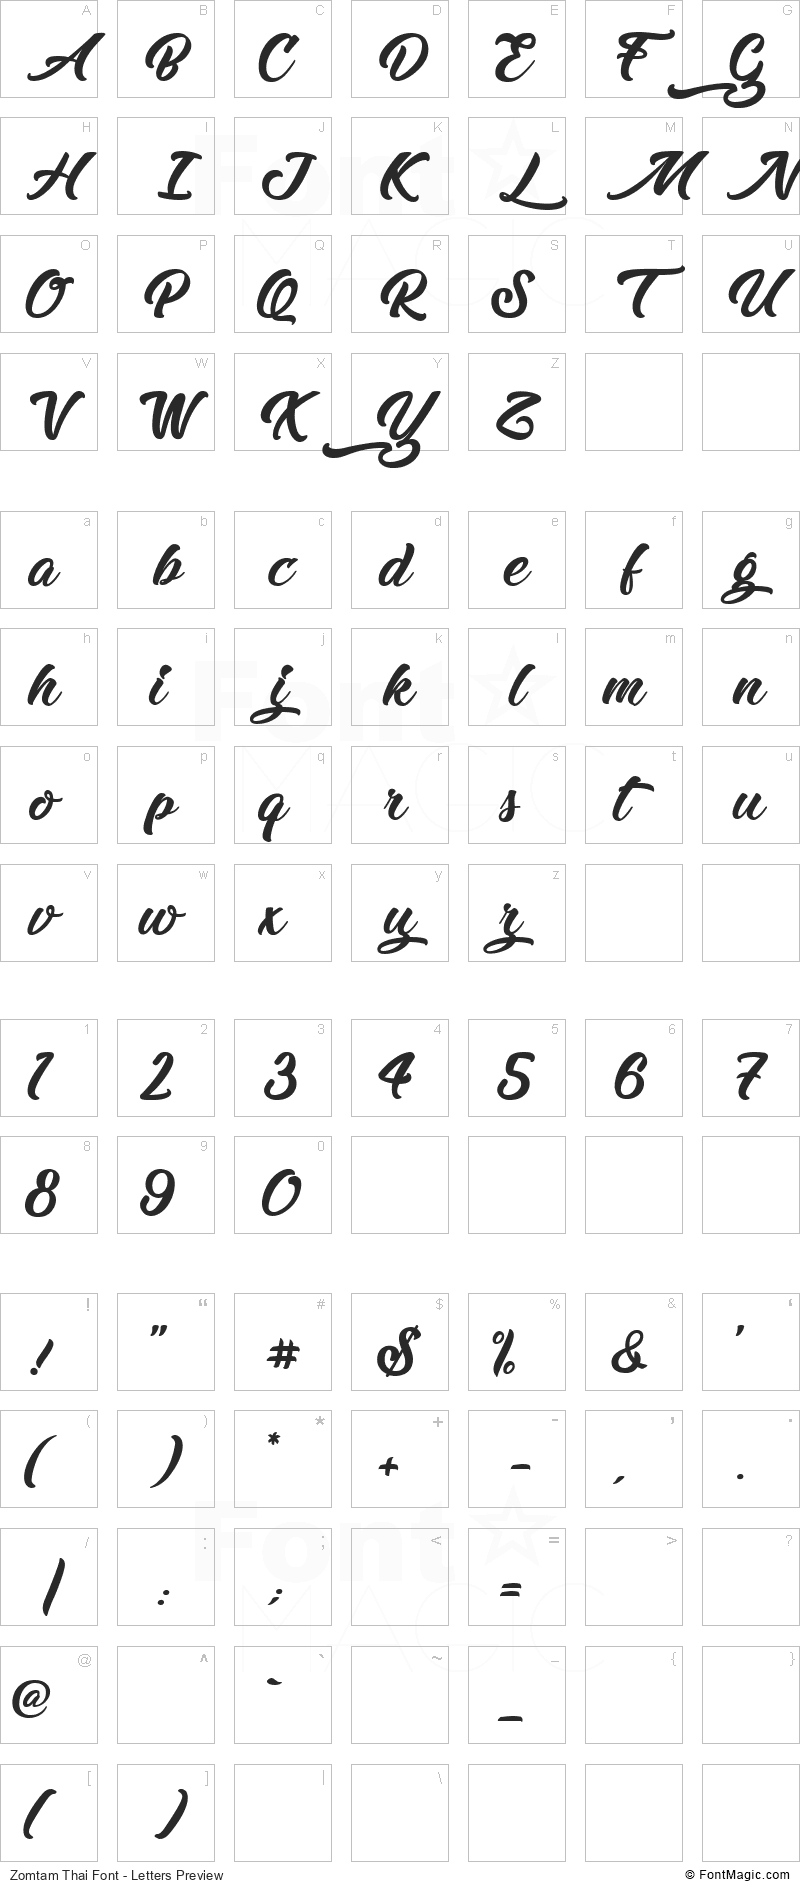 Zomtam Thai Font - All Latters Preview Chart